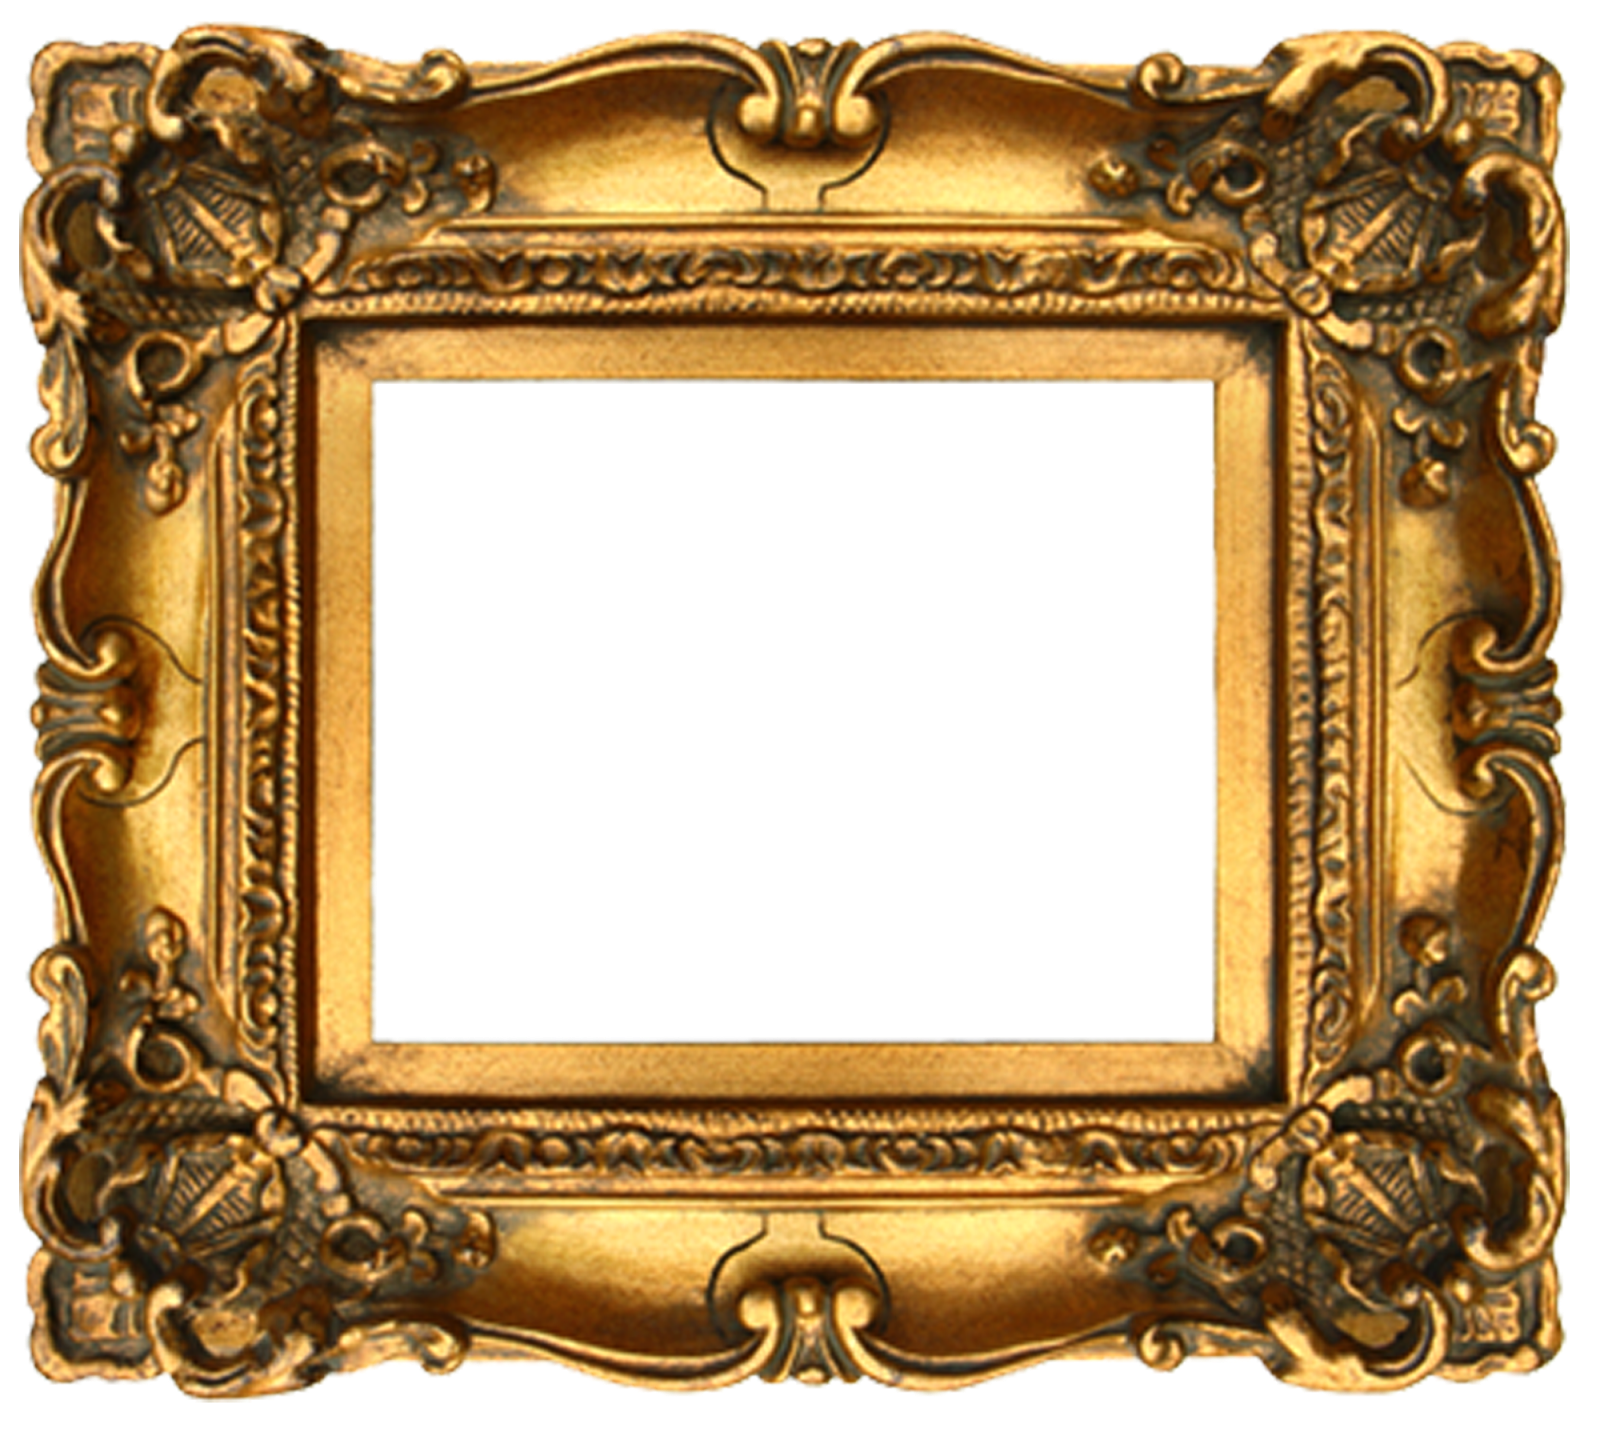 Frame Backgrounds, Compatible - PC, Mobile, Gadgets| 1600x1440 px